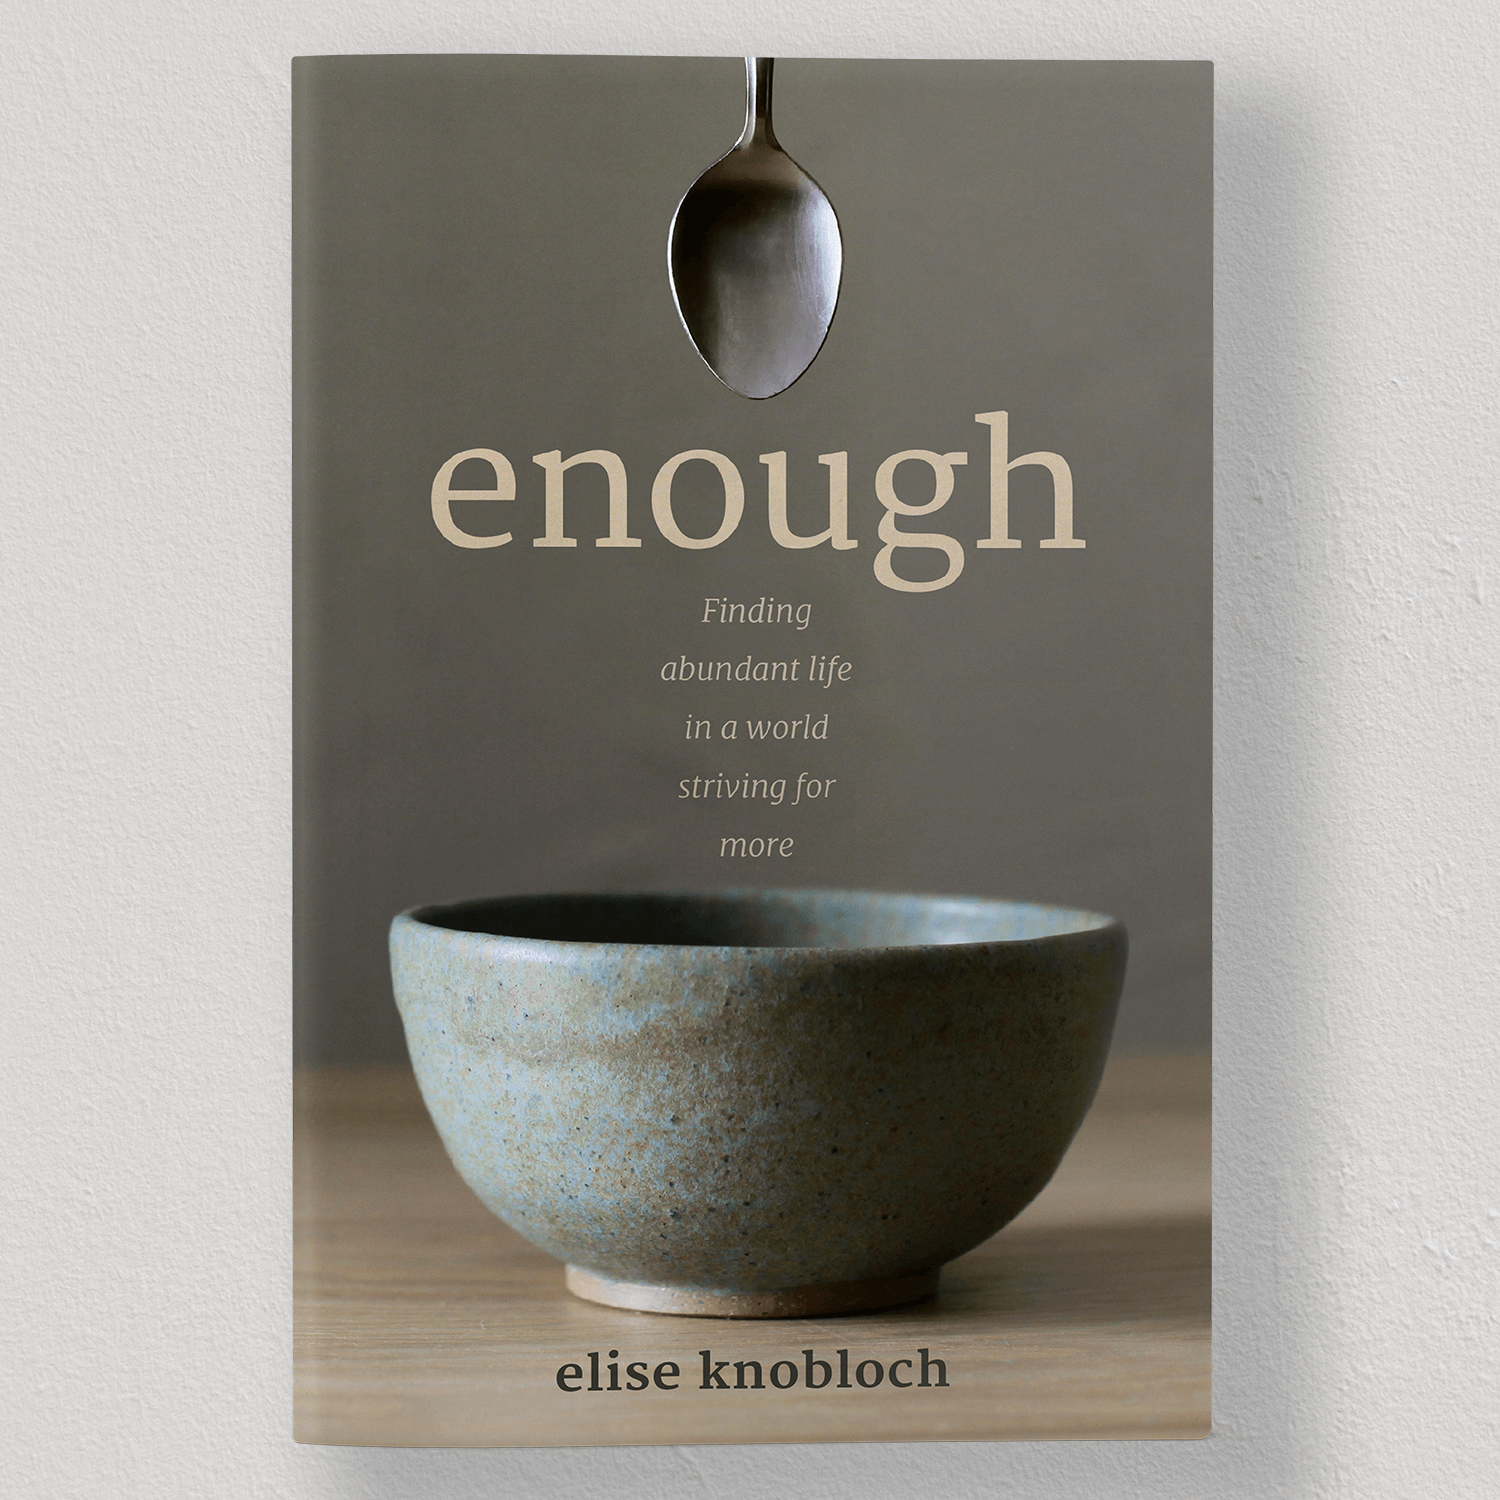 Enough, by Elise Knobloch